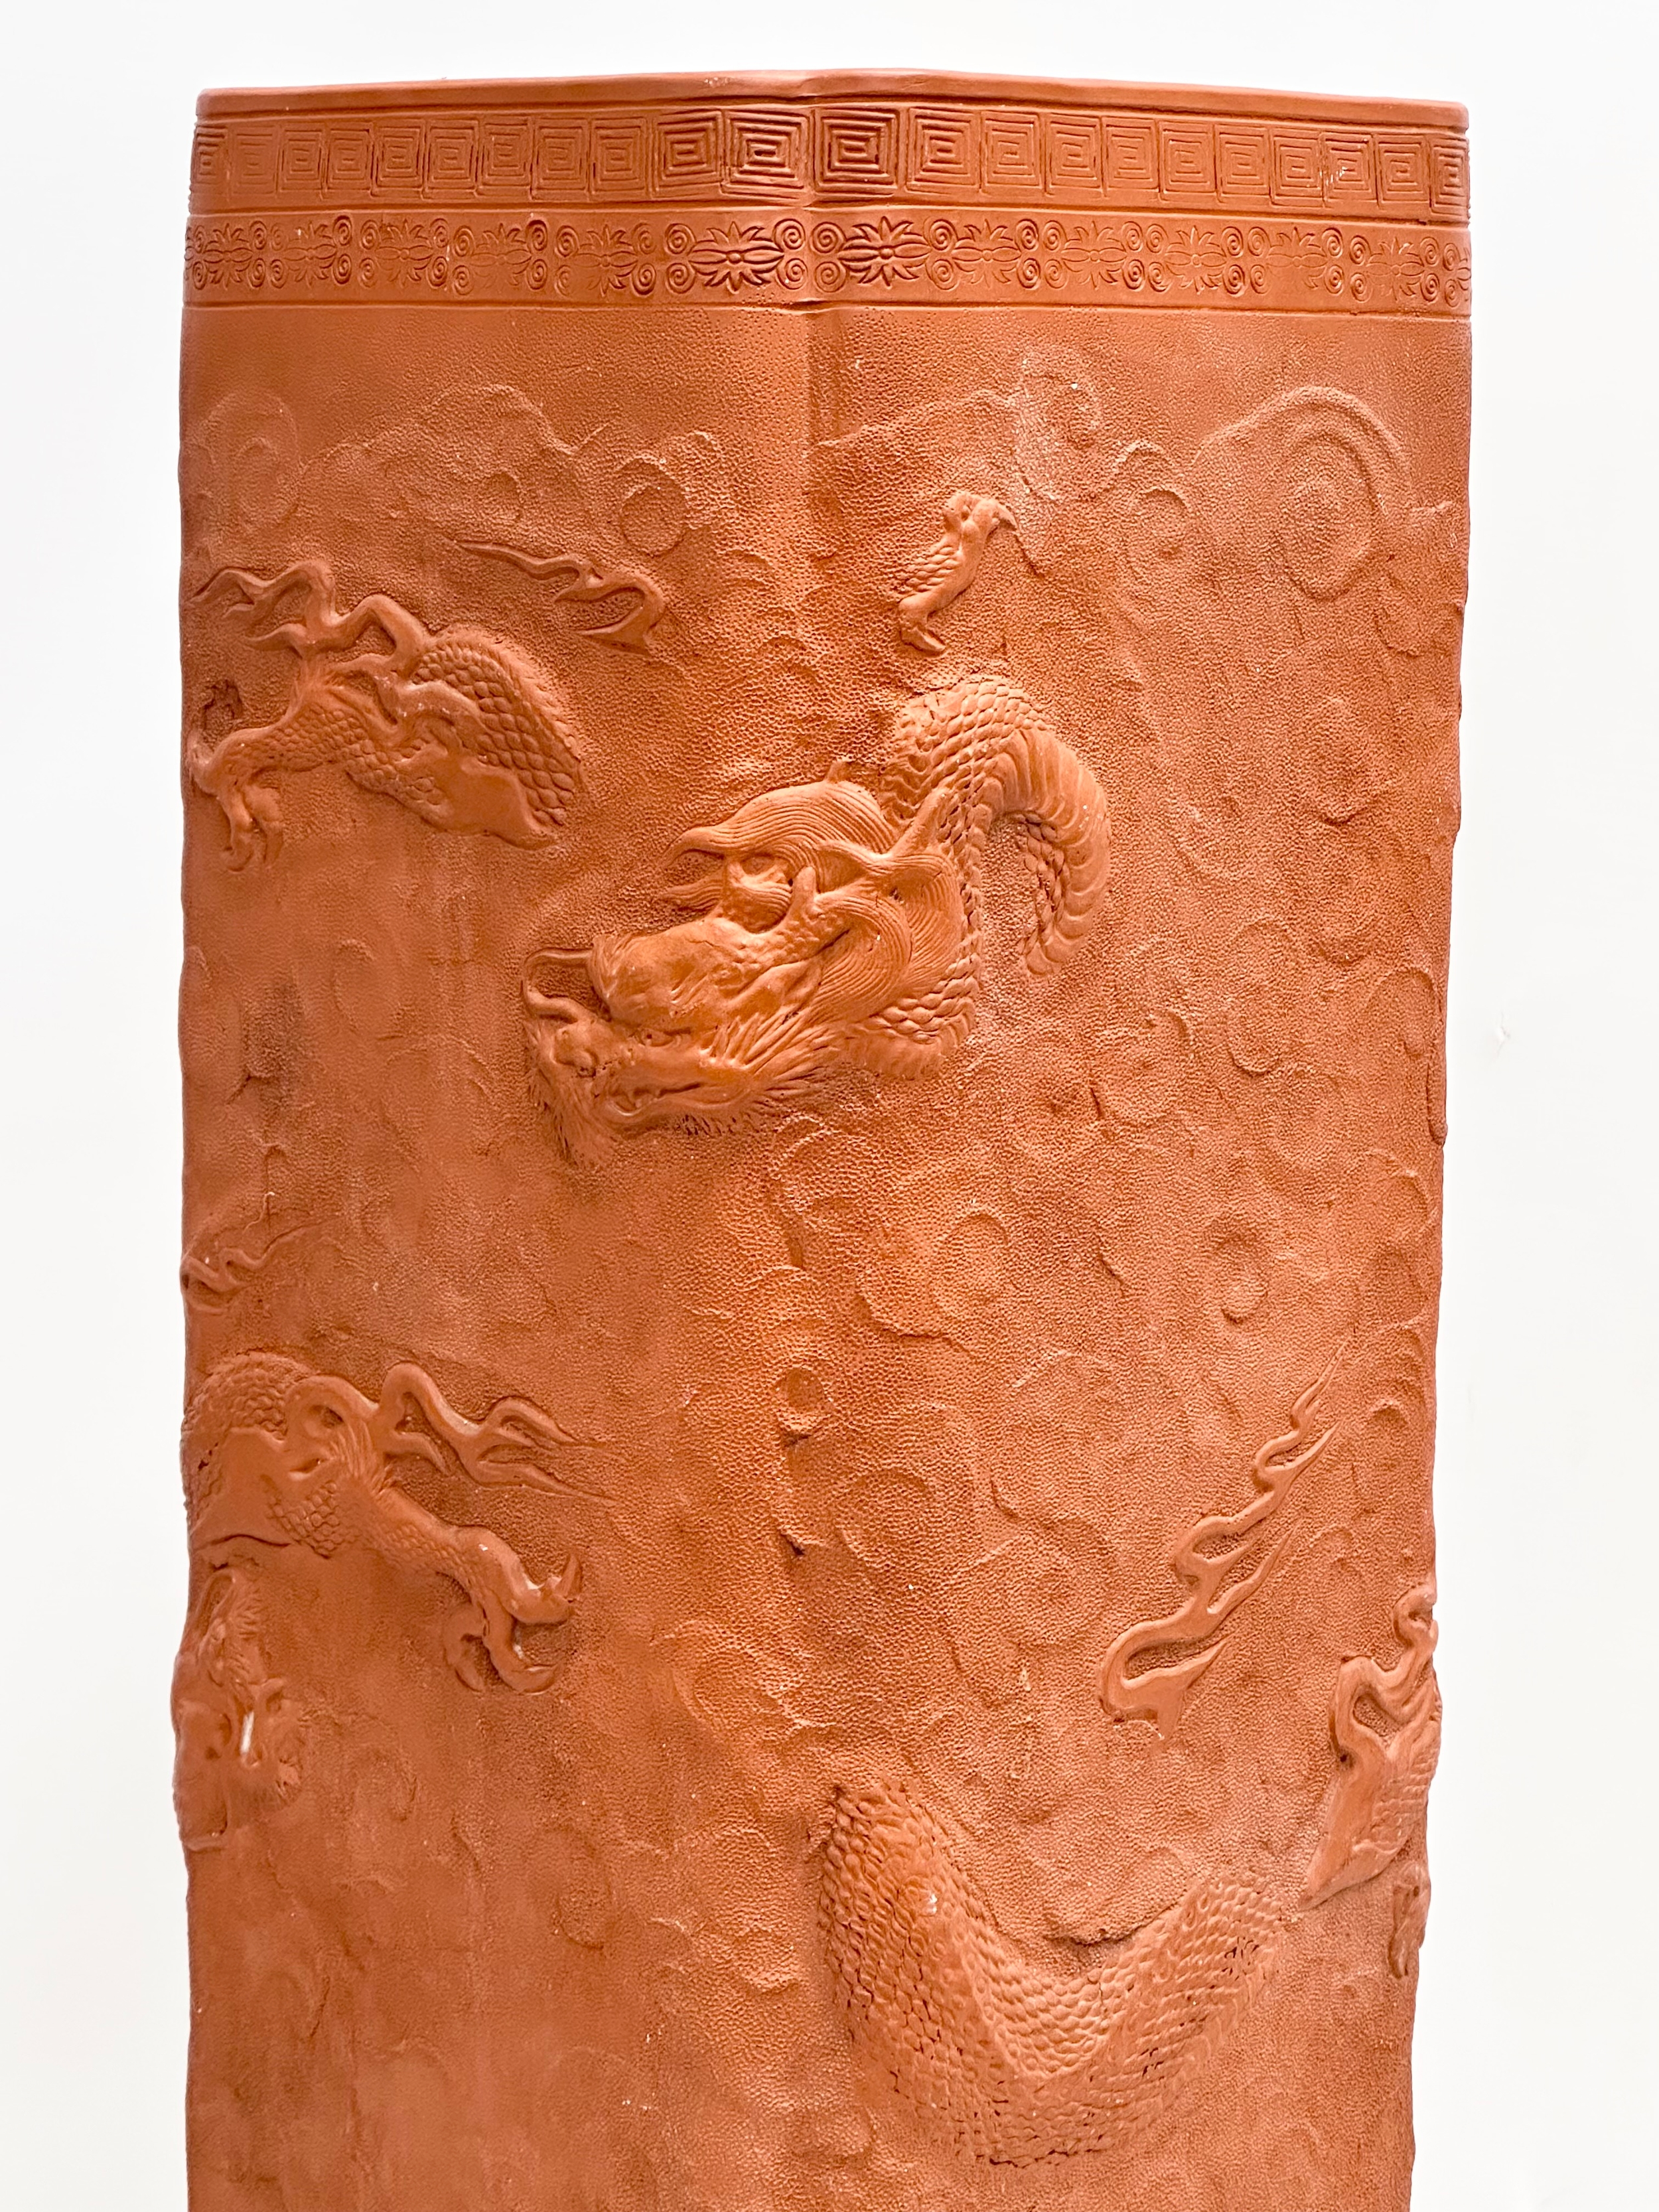 A Chinese terracotta stick stand/planter with dragon motif and Greek Key decoration. 21x21x61cm - Image 7 of 8